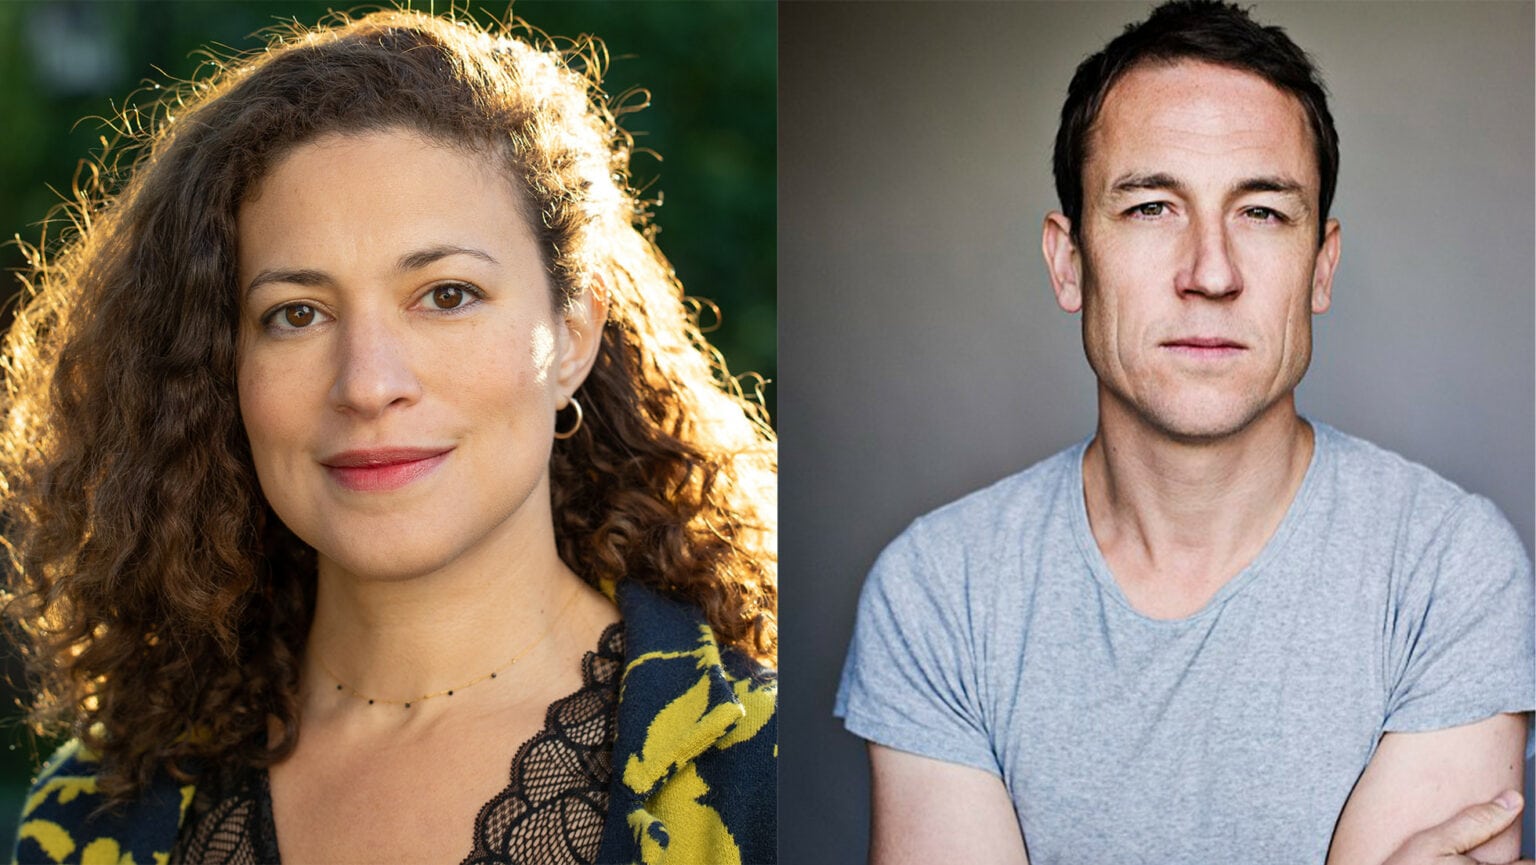 “Manhunt” is created by writer/producer Monica Beletsky and stars Tobias Menzies.